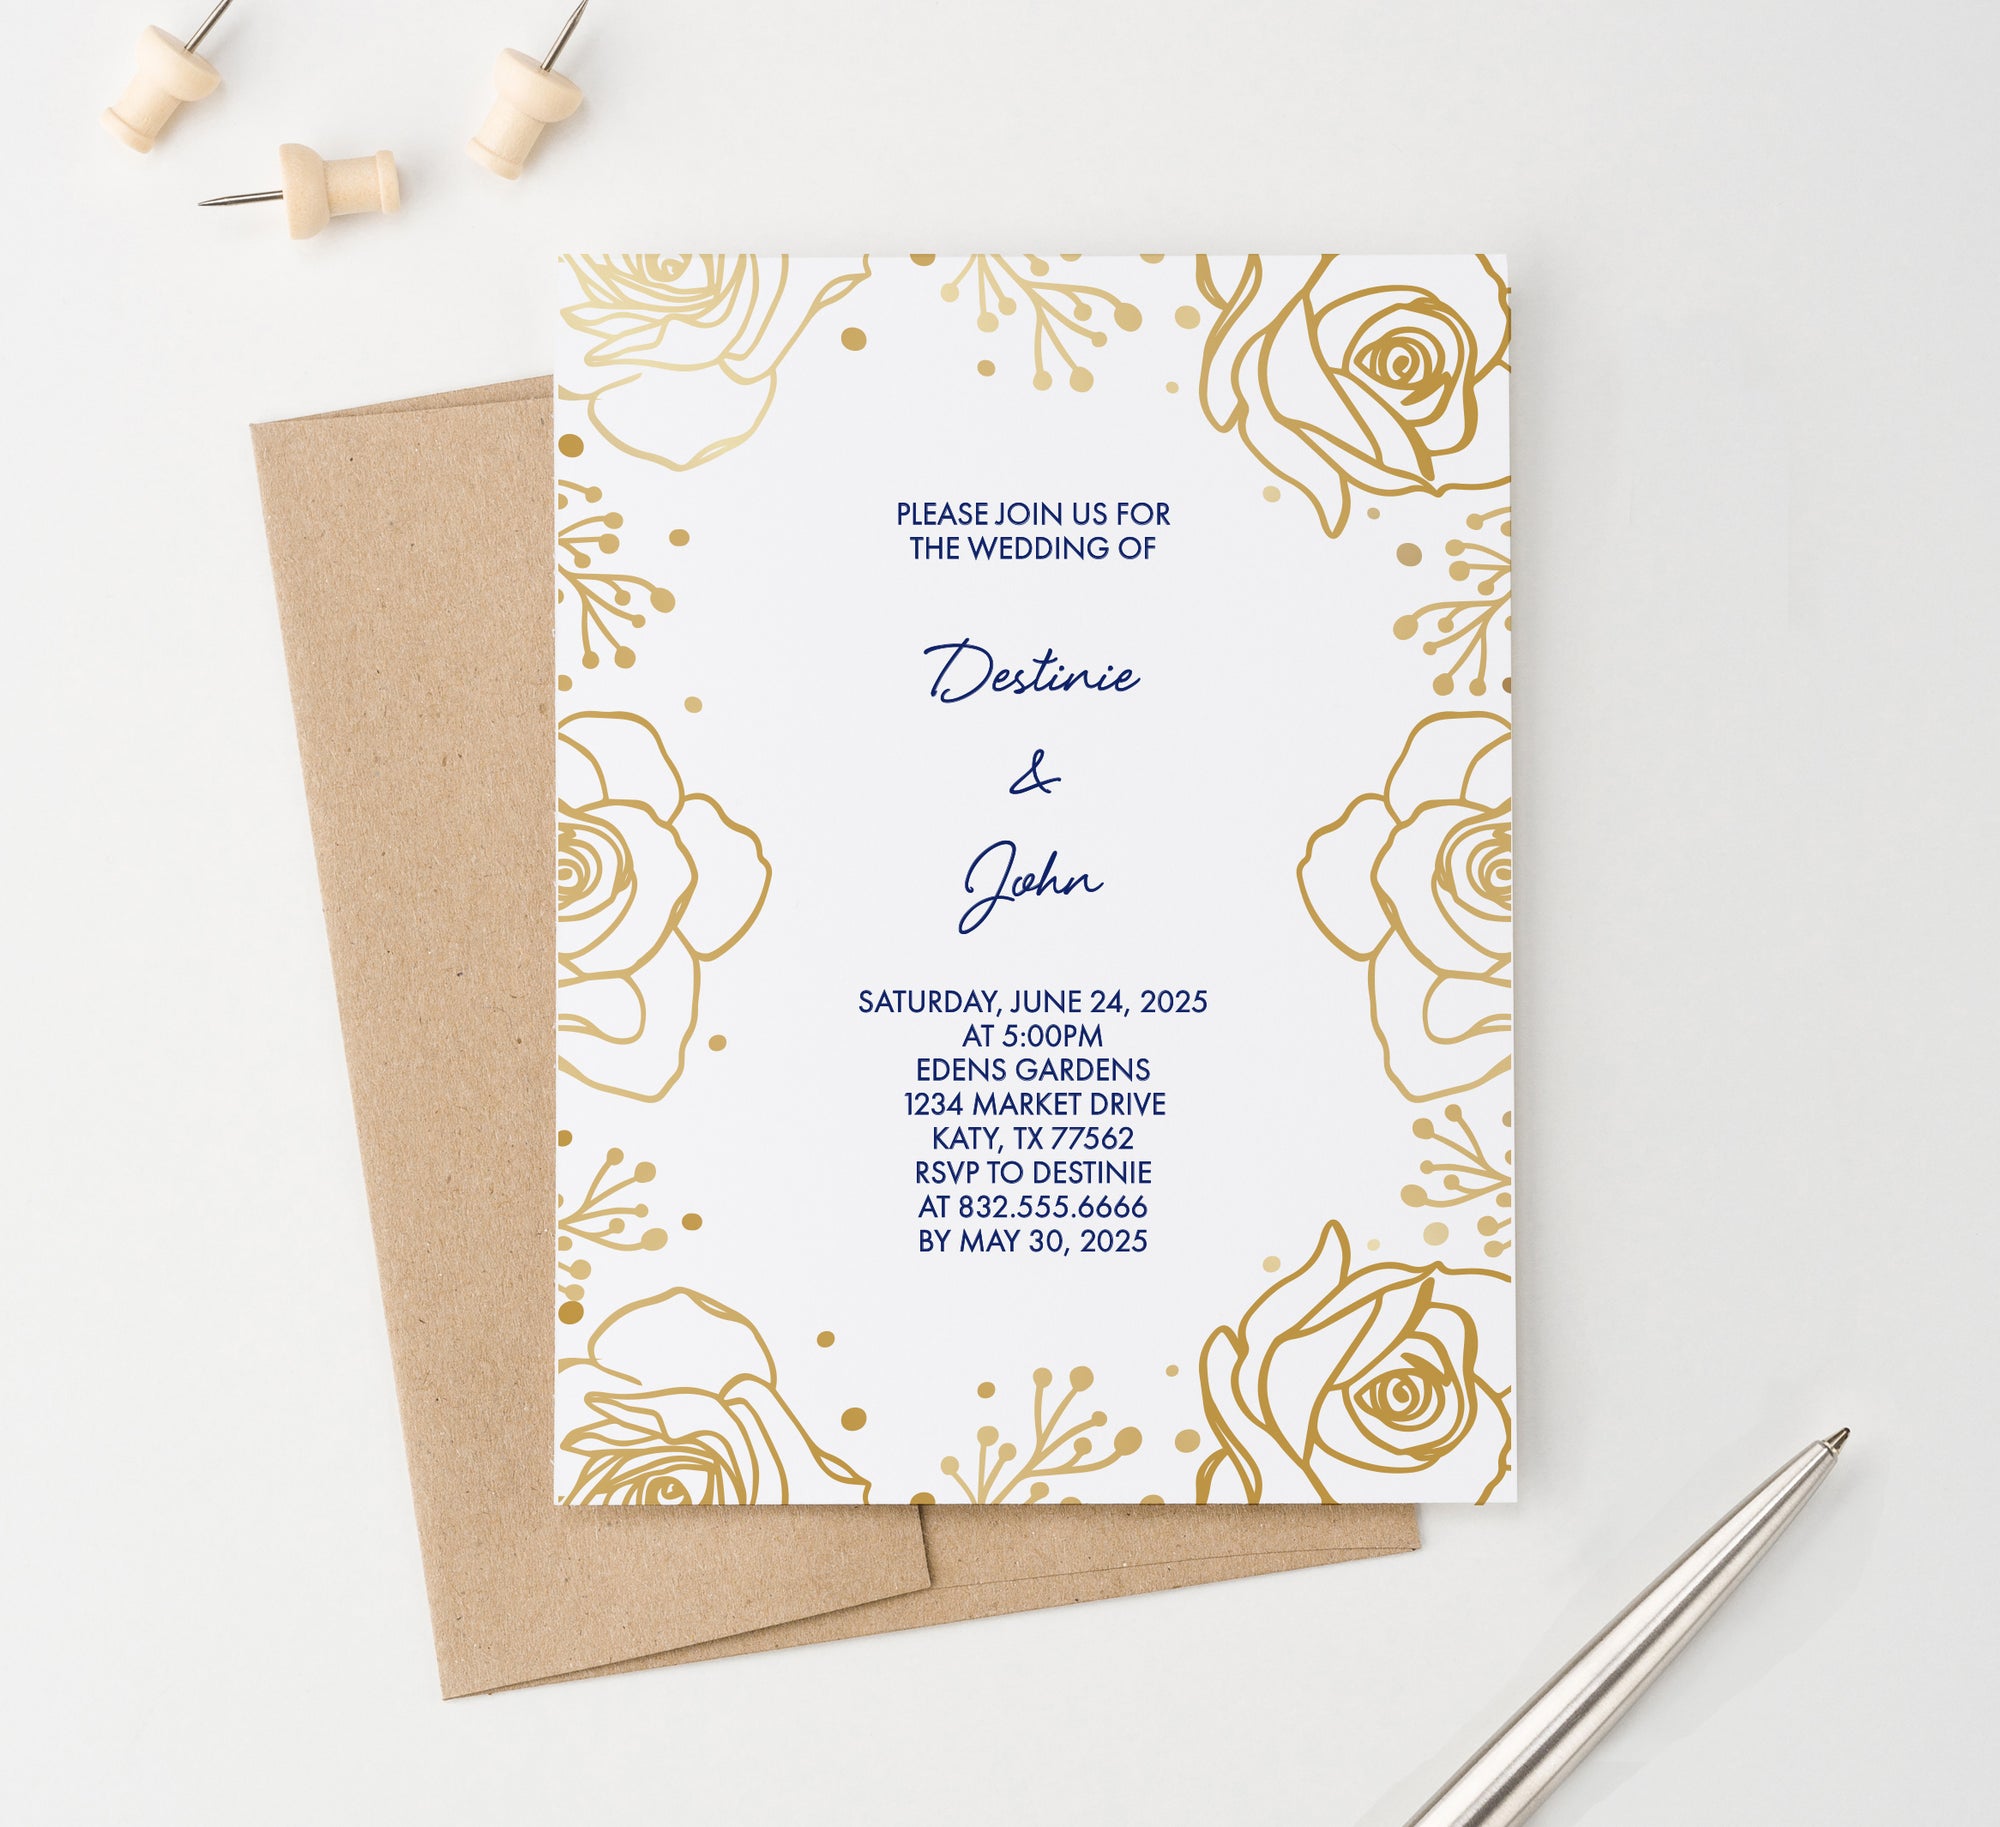    WI056 Gold Rose Wedding Invitation Personalized floral floral flower flowers navy elegant modern marriage invites